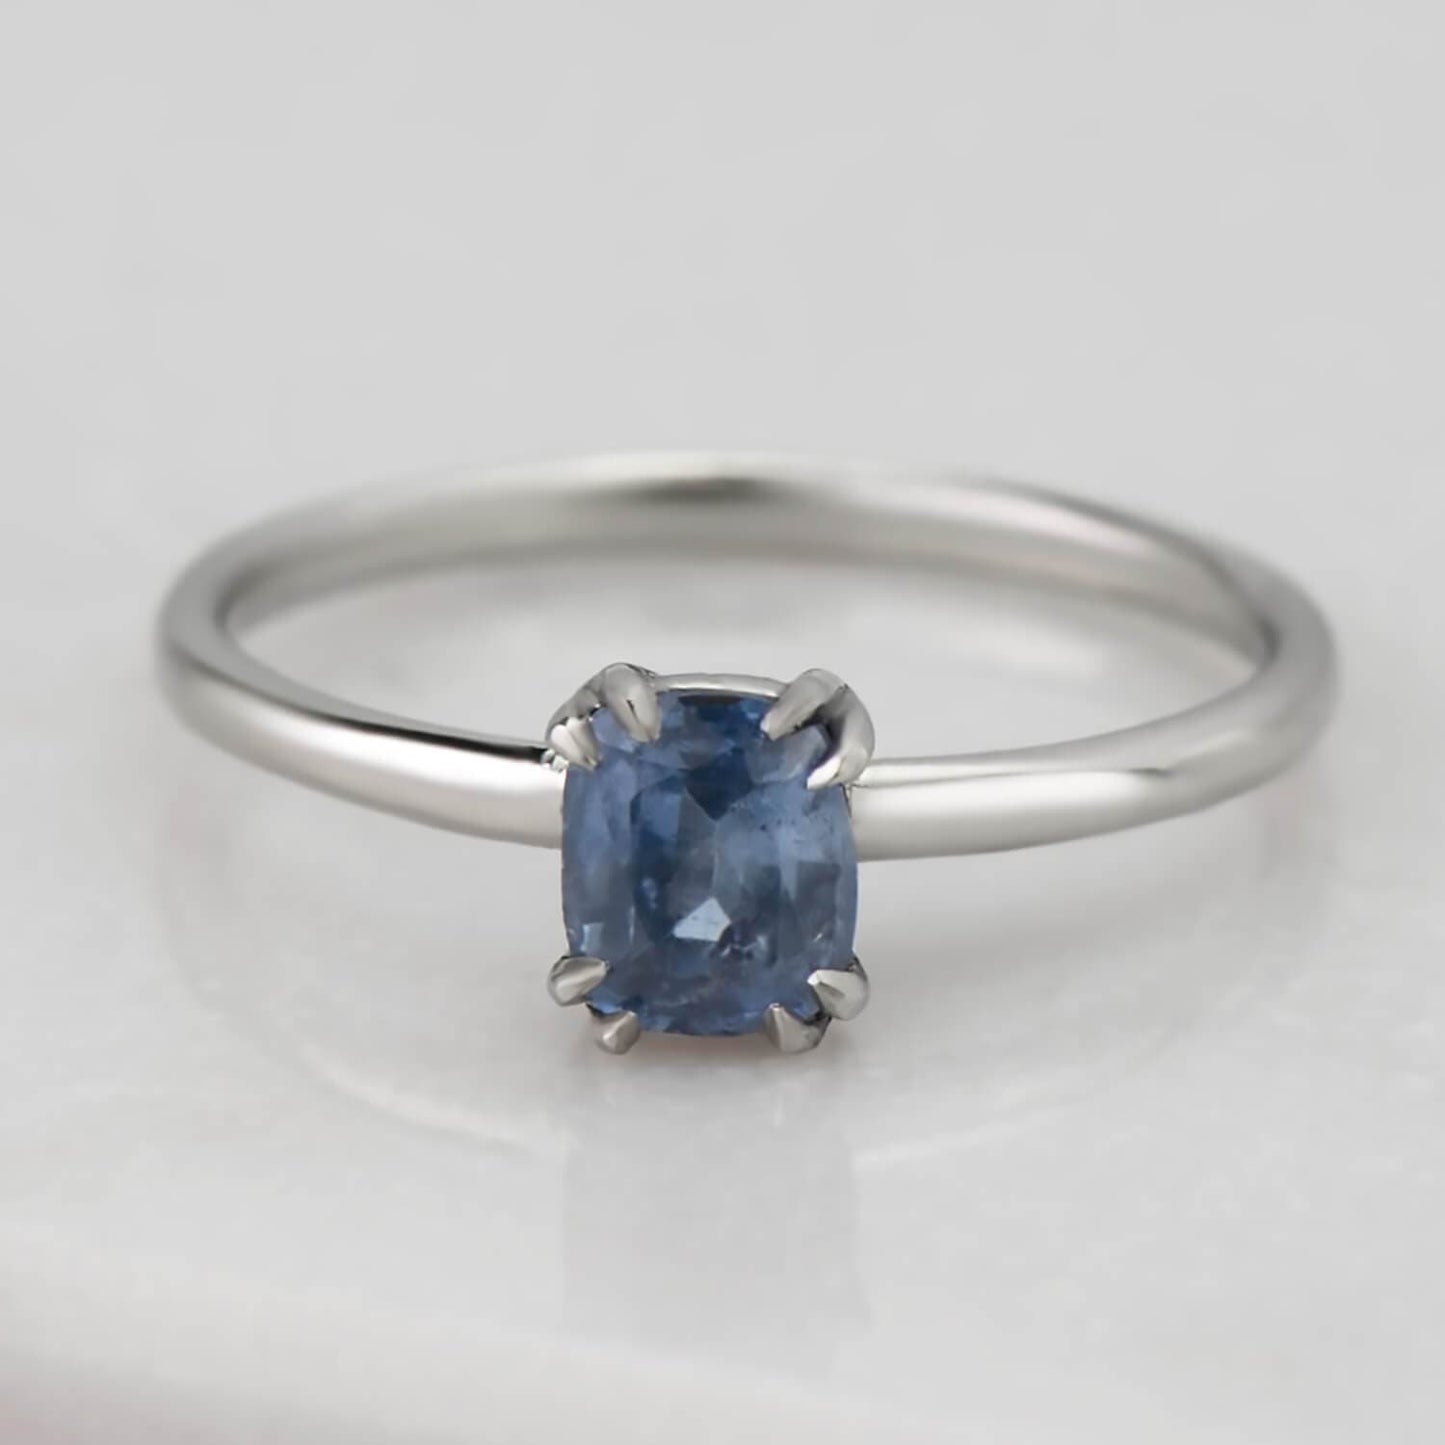 Recycled 14 karat white gold solitaire sapphire ring. The band is 1.80mm in width and 1.2mm in thickness, in an eight prong setting it houses a 0.41 carat natural blue cushion cut sapphire